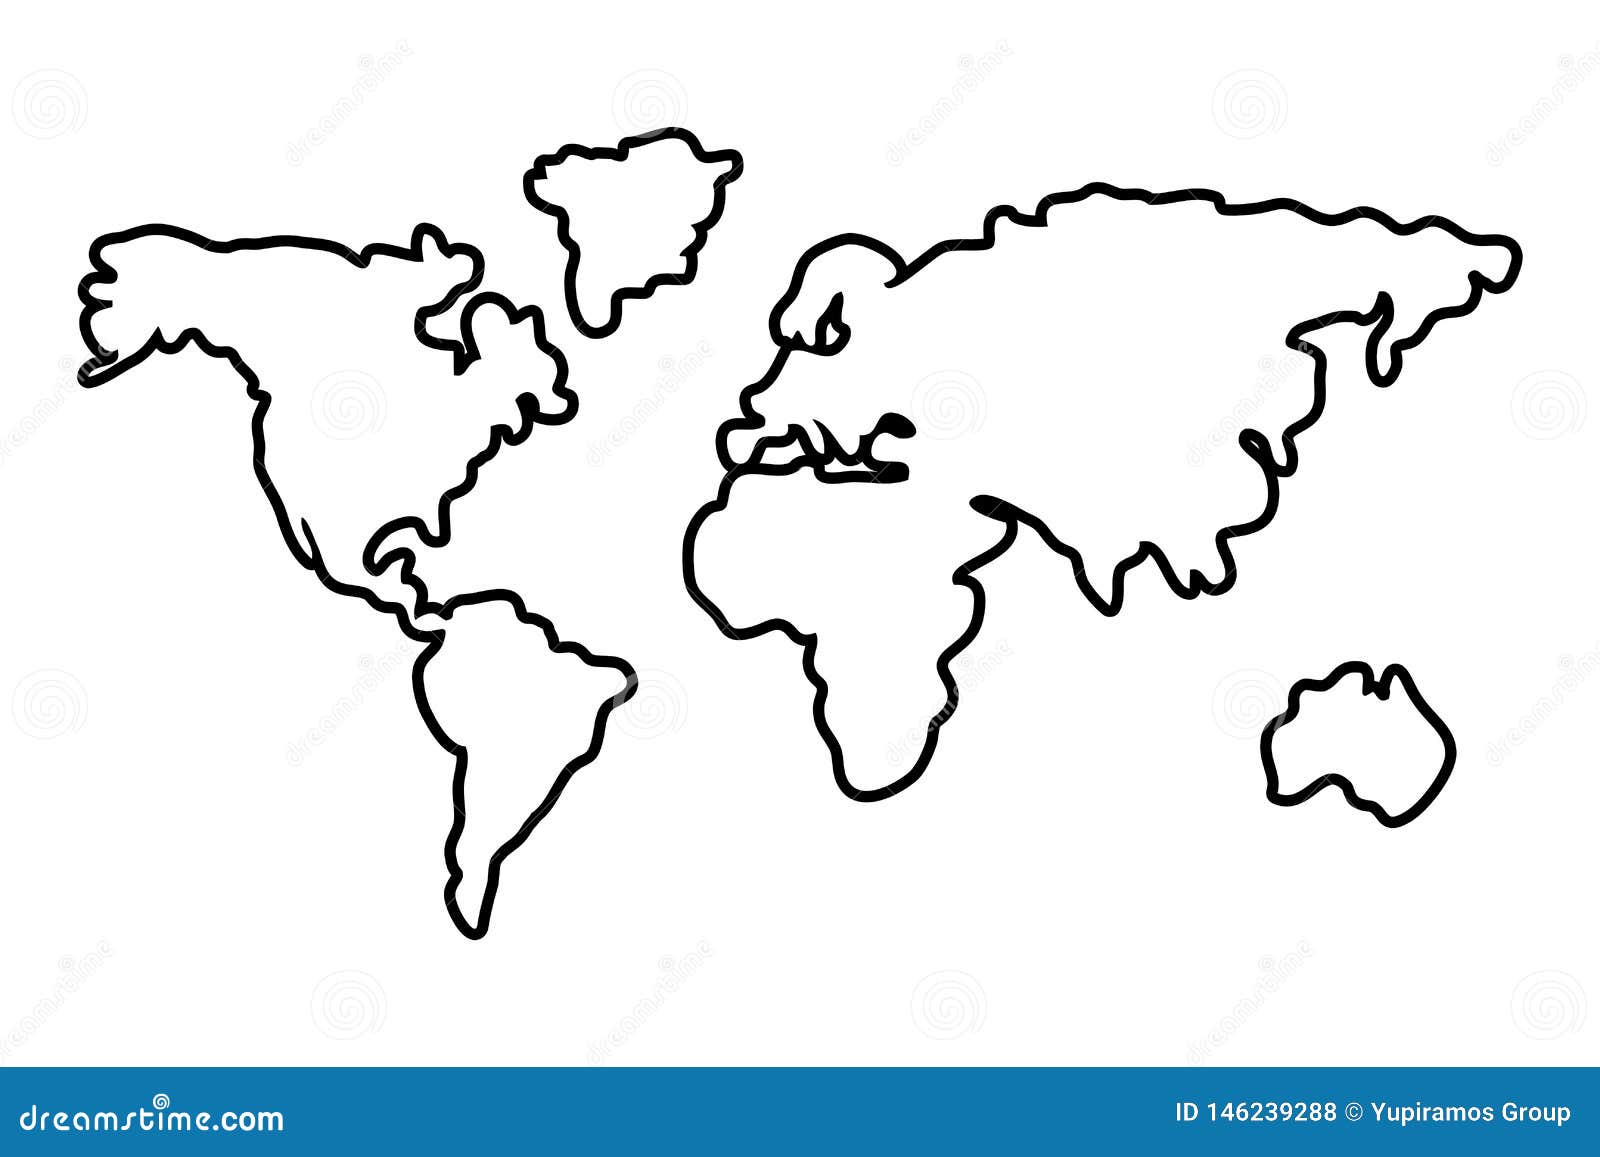 Worldwide Map Outline Continents Isolated Black And White Stock